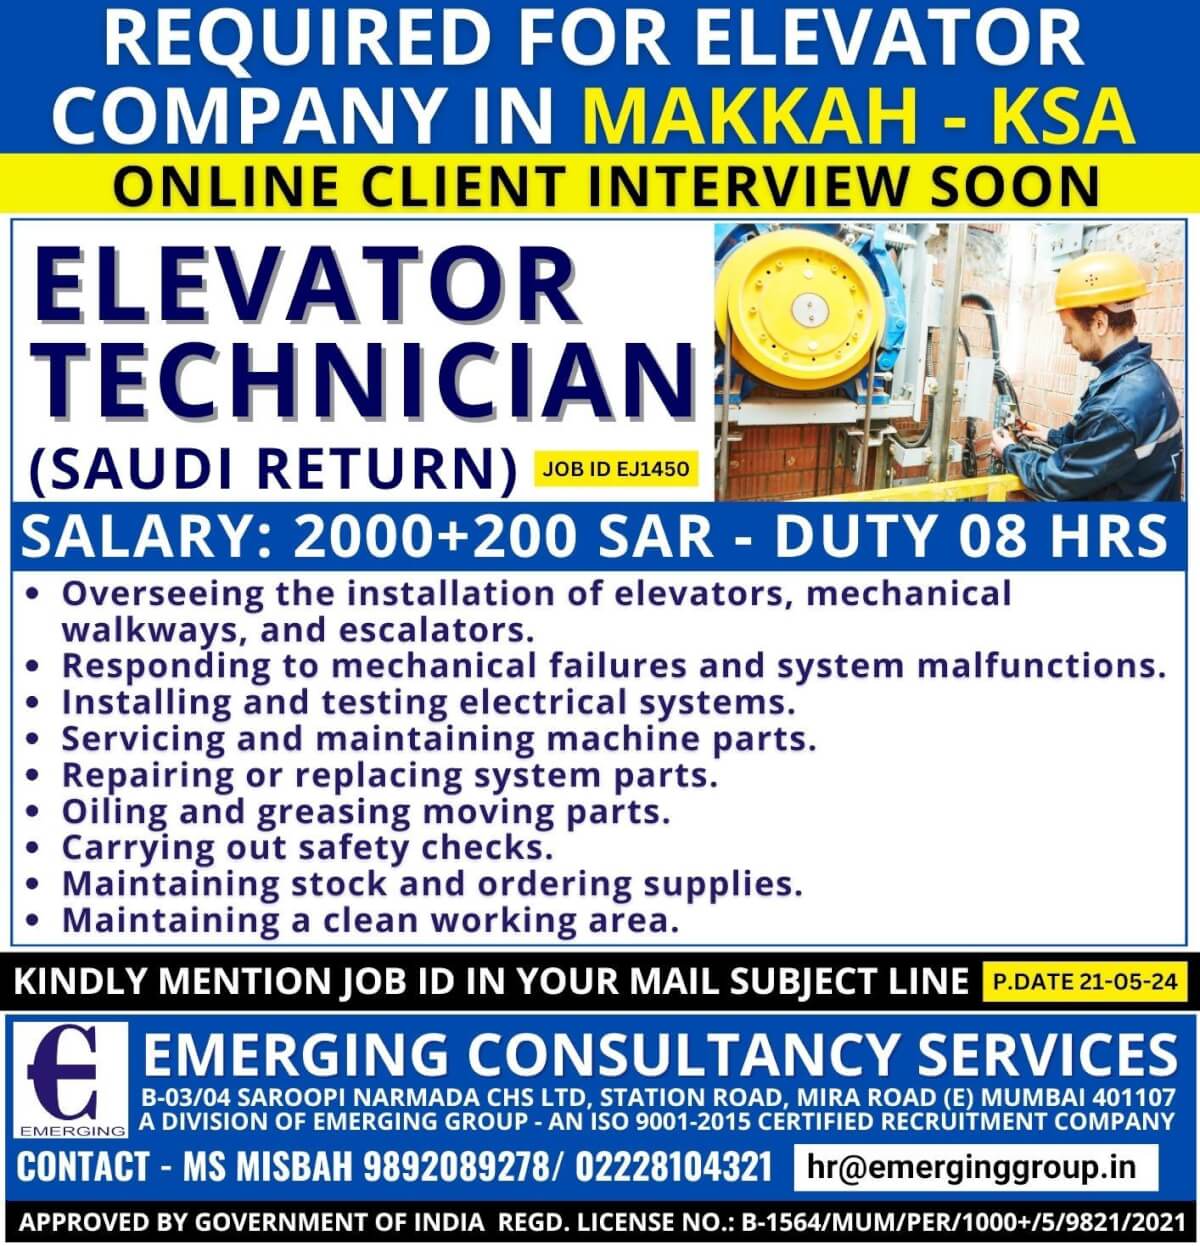 REQUIRED FOR ELEVATOR COMPANY IN MAKKAH - KSA ONLINE CLIENT INTERVIEW SOON